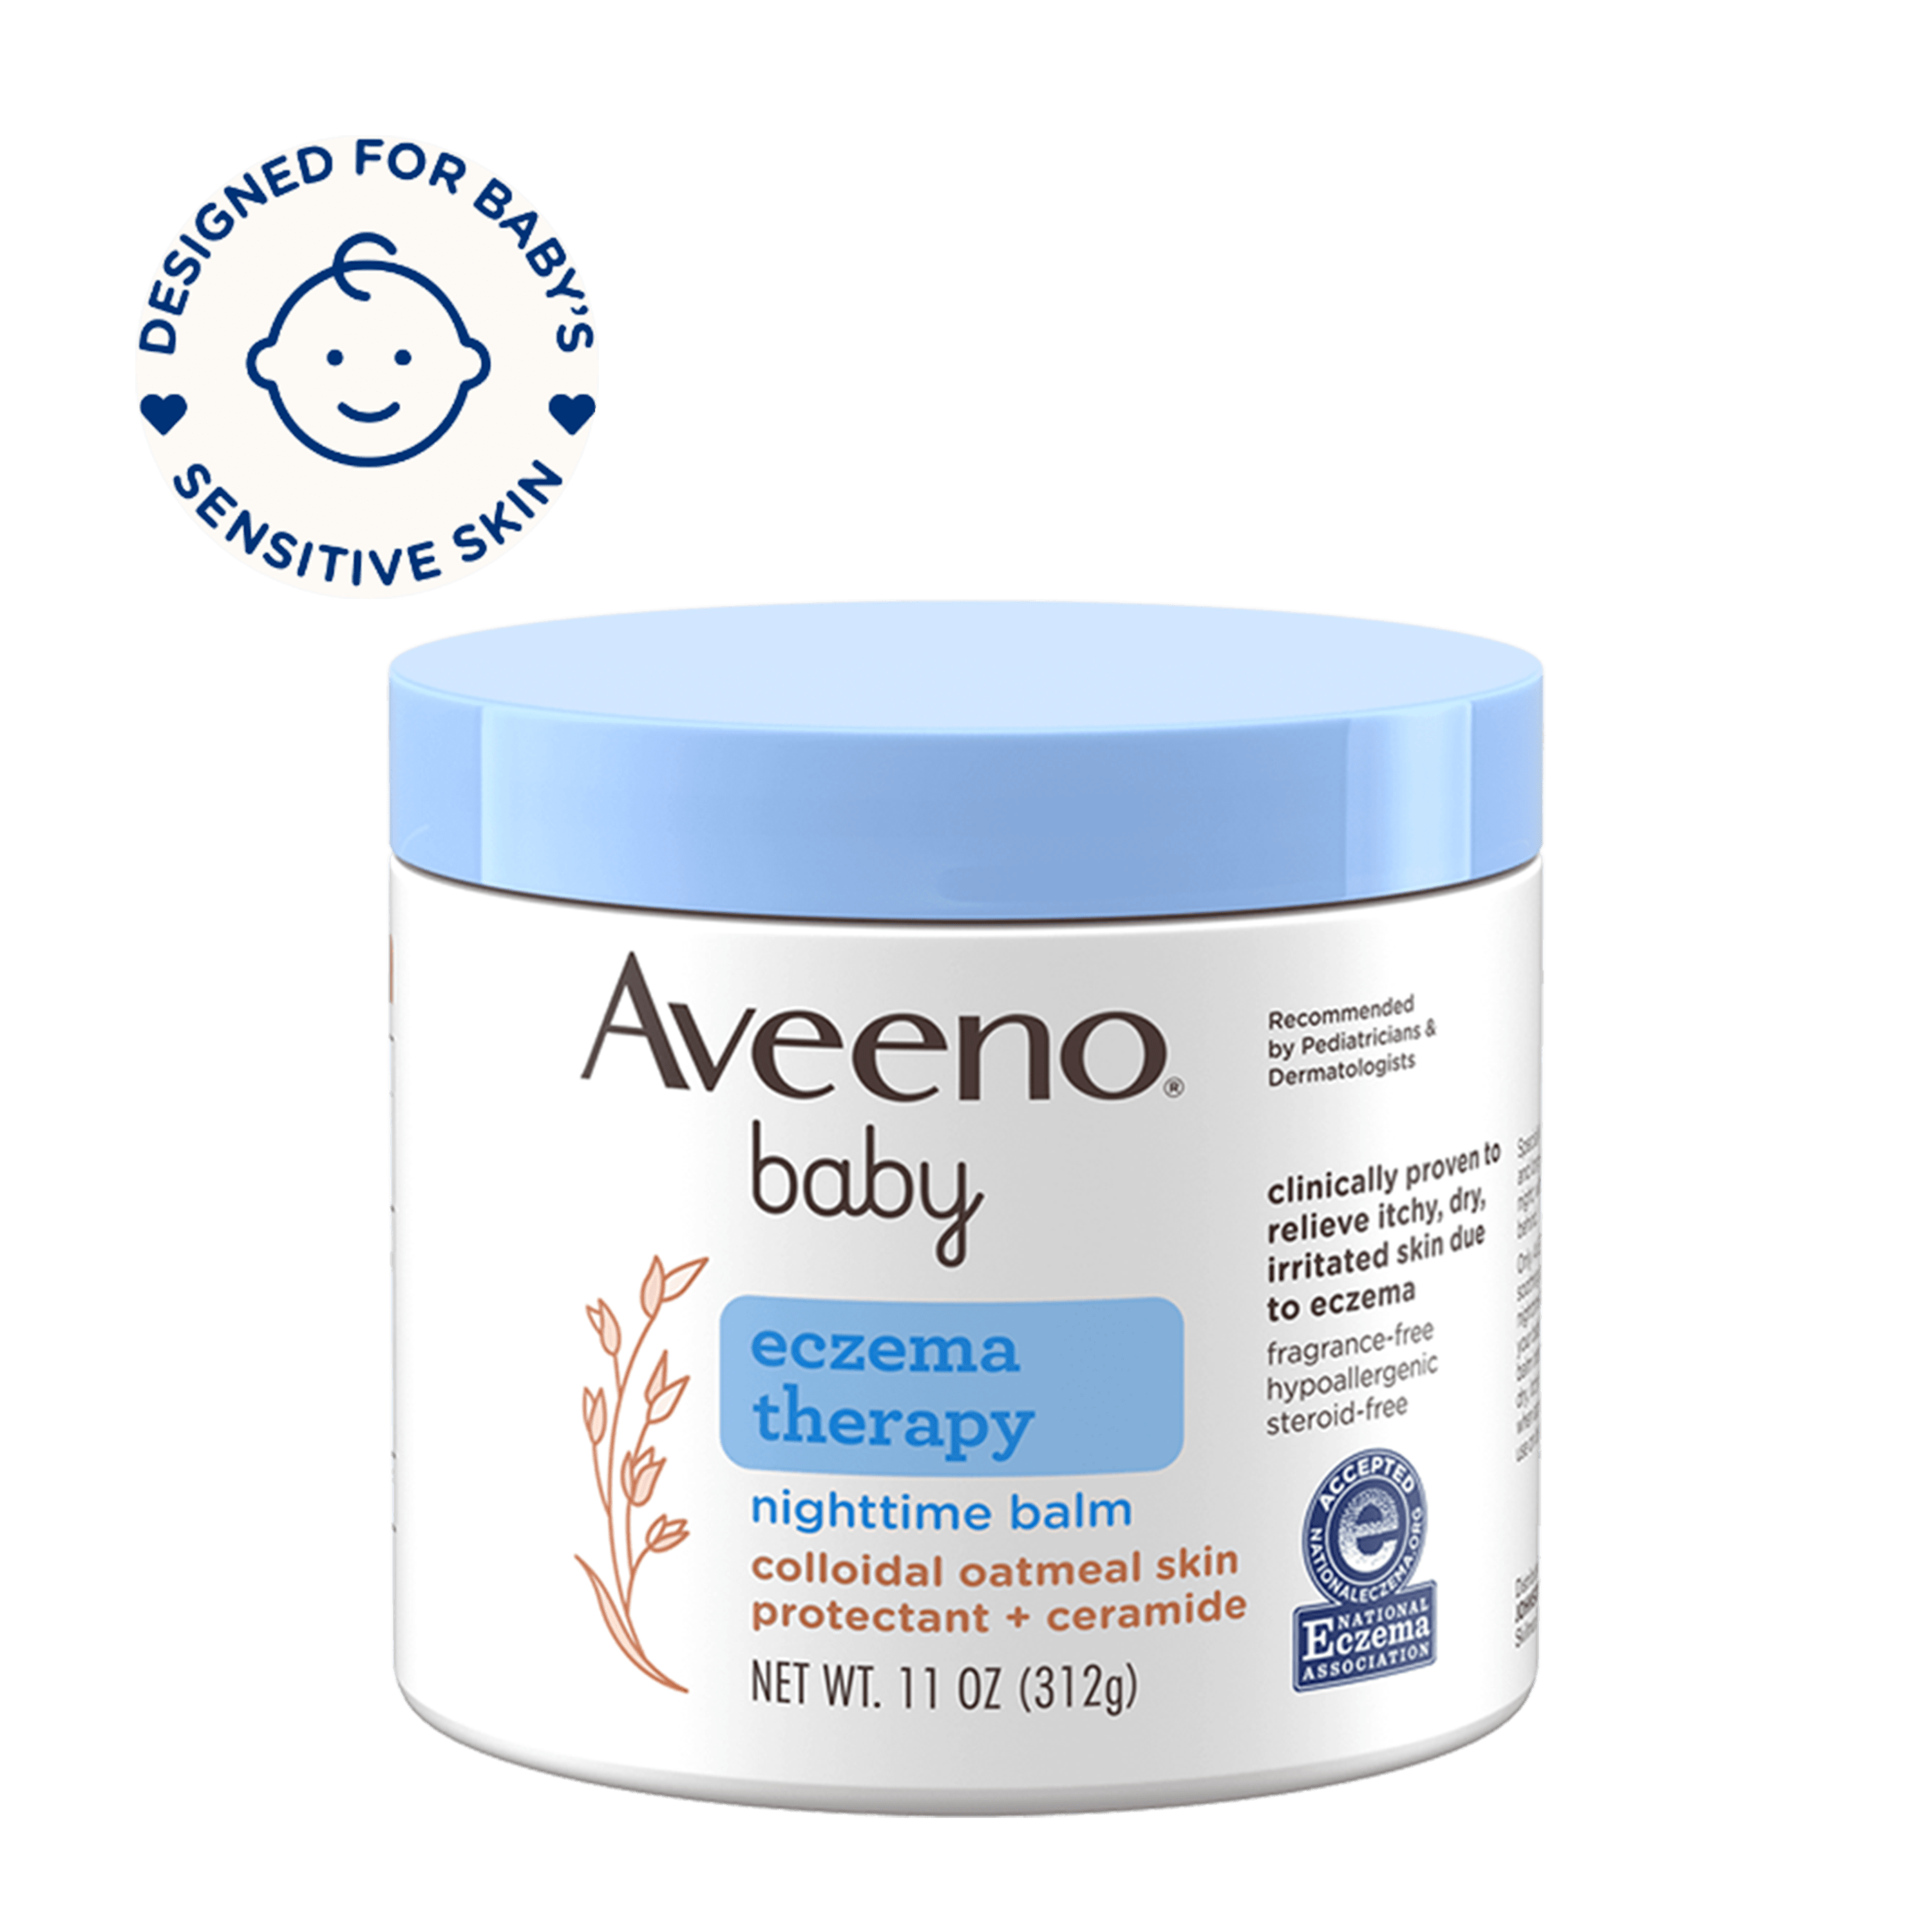 Baby Eczema Therapy Nighttime Balm with Colloidal oat